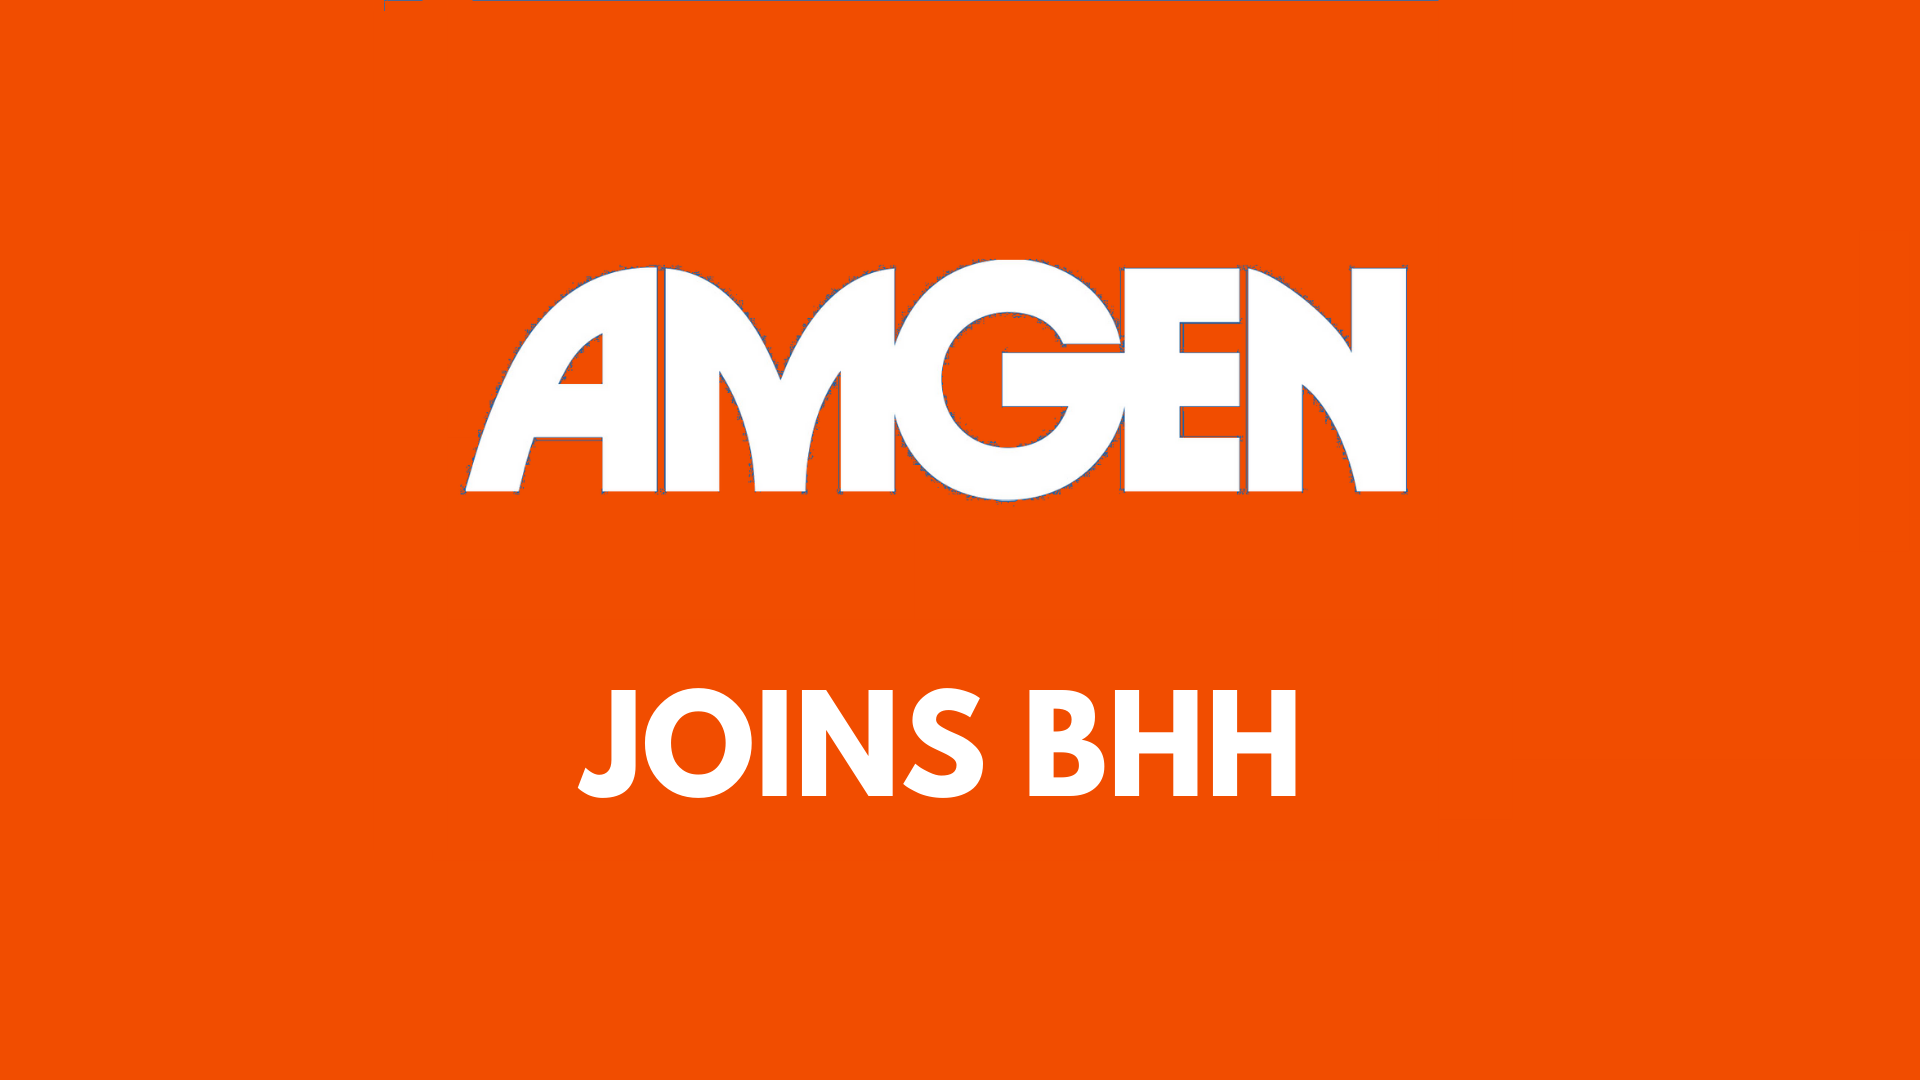 Barcelona Health Hub is proud to annouce that Amgen joins its digital health ecosystem